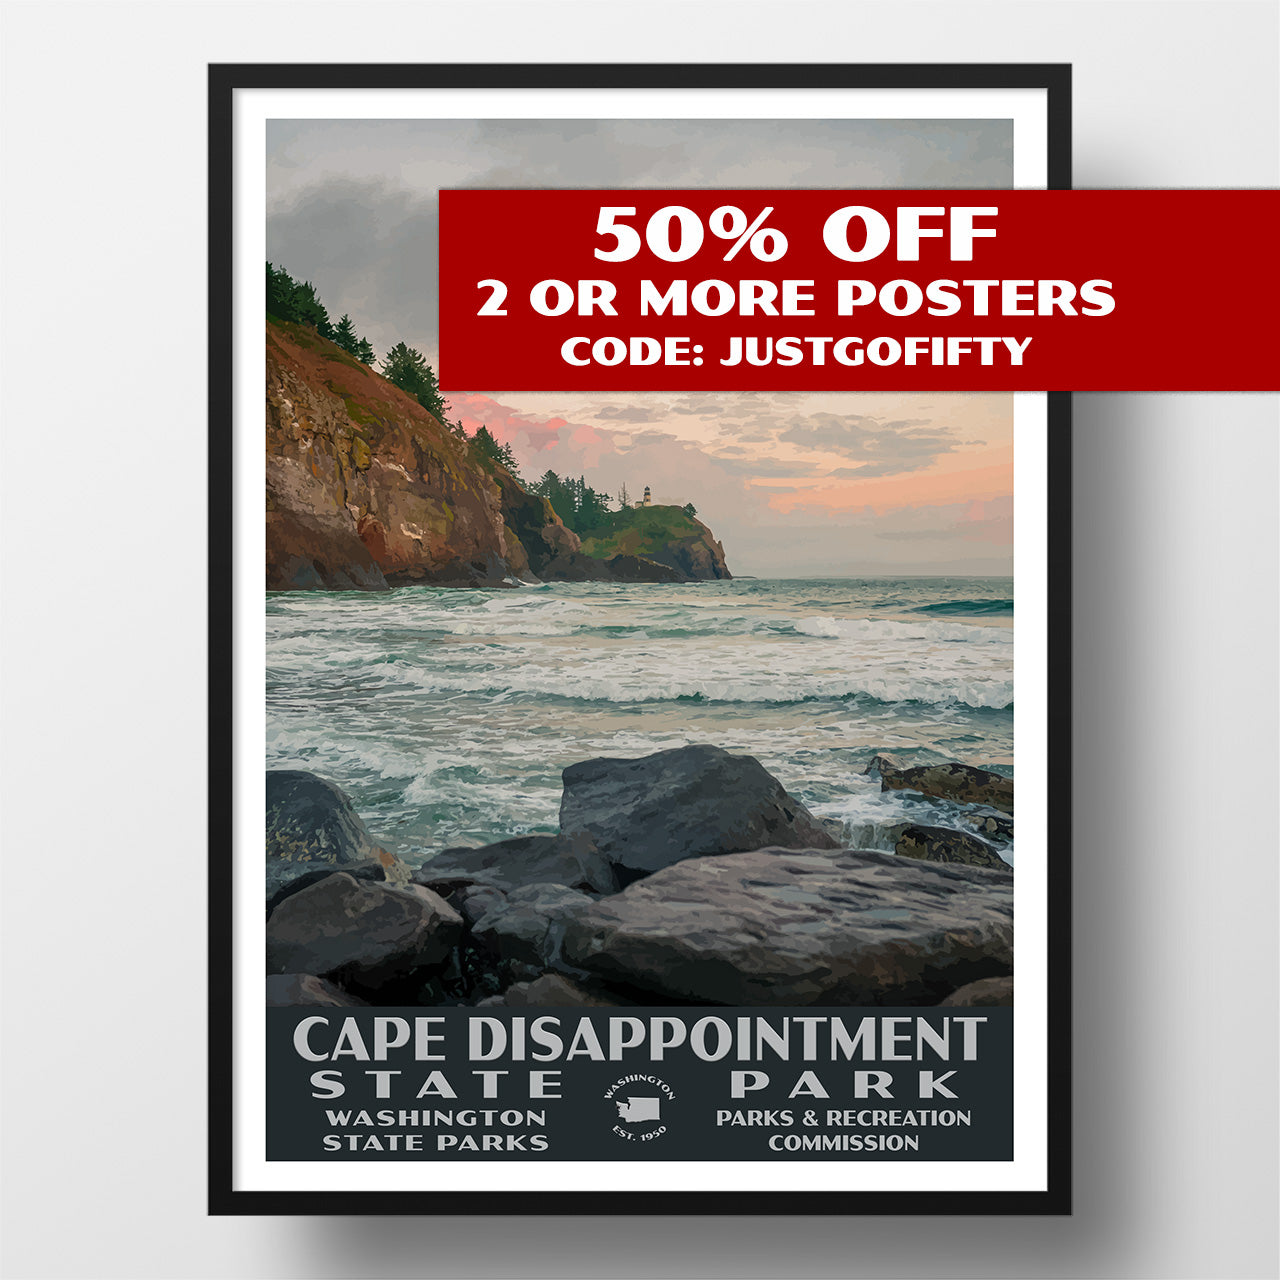 Cape Disappointment State Park Poster-WPA (Moonrise)